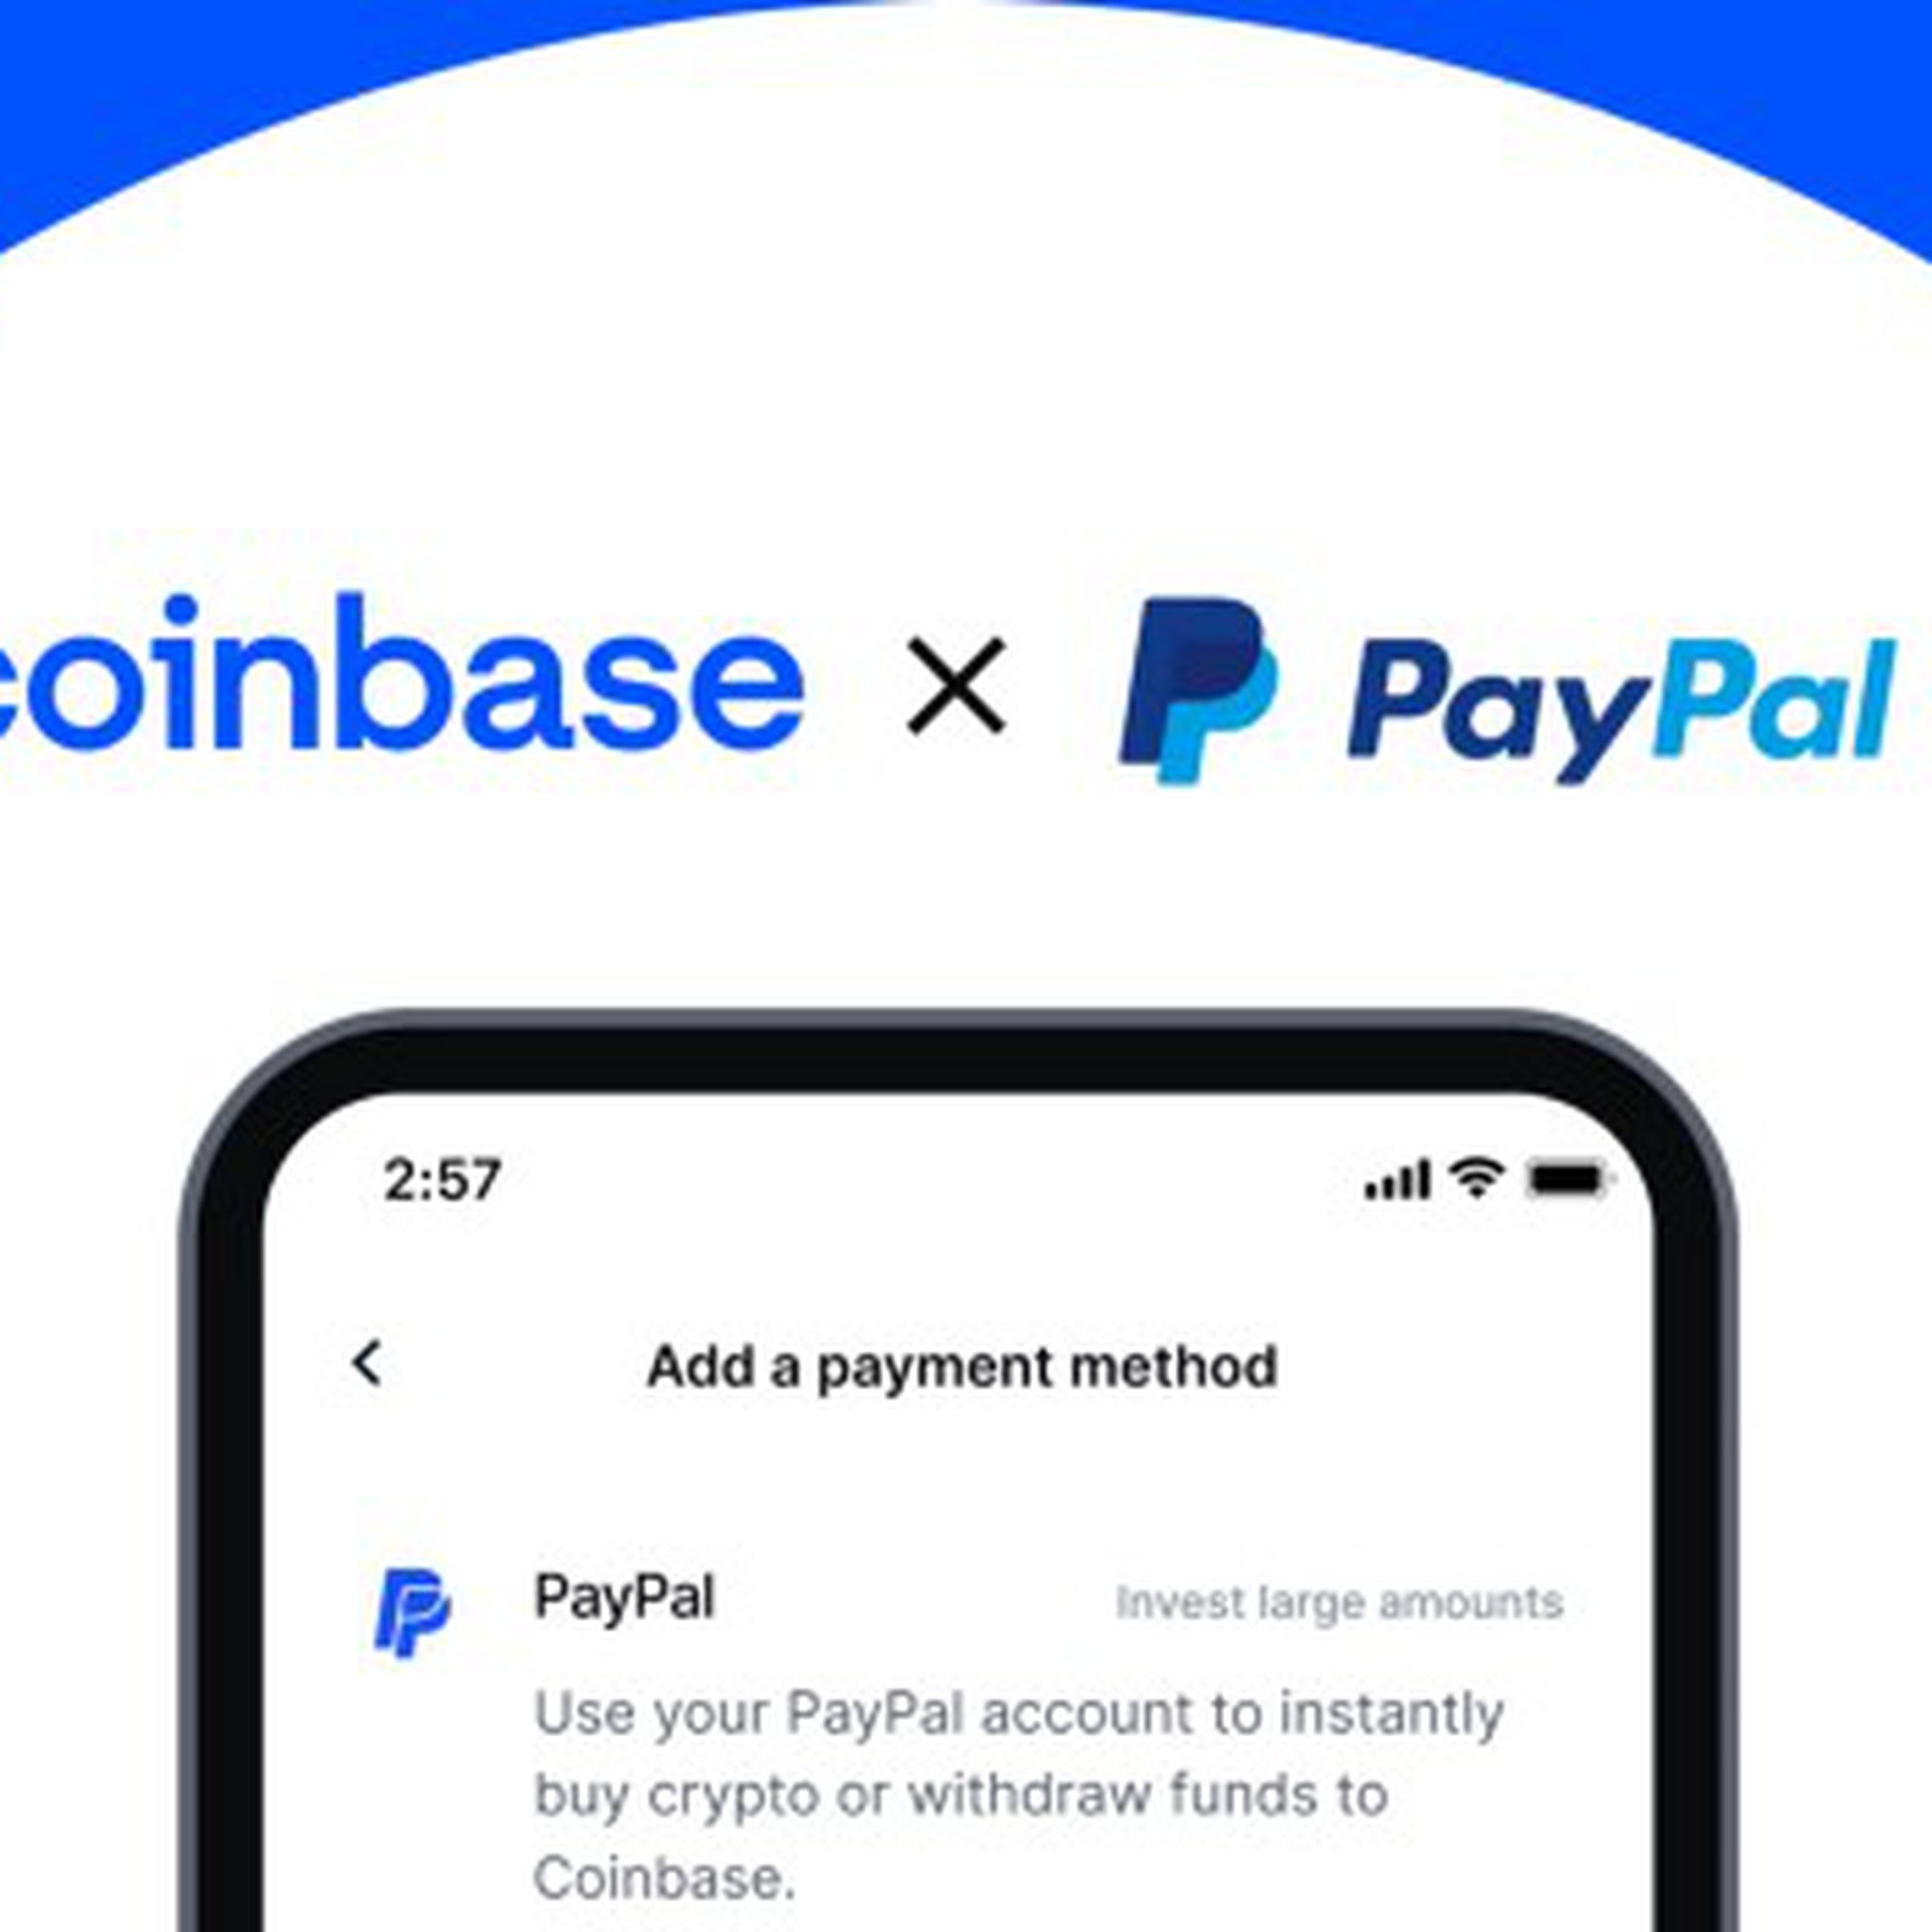 PayPal is now available as a payment method for US Coinbase users.